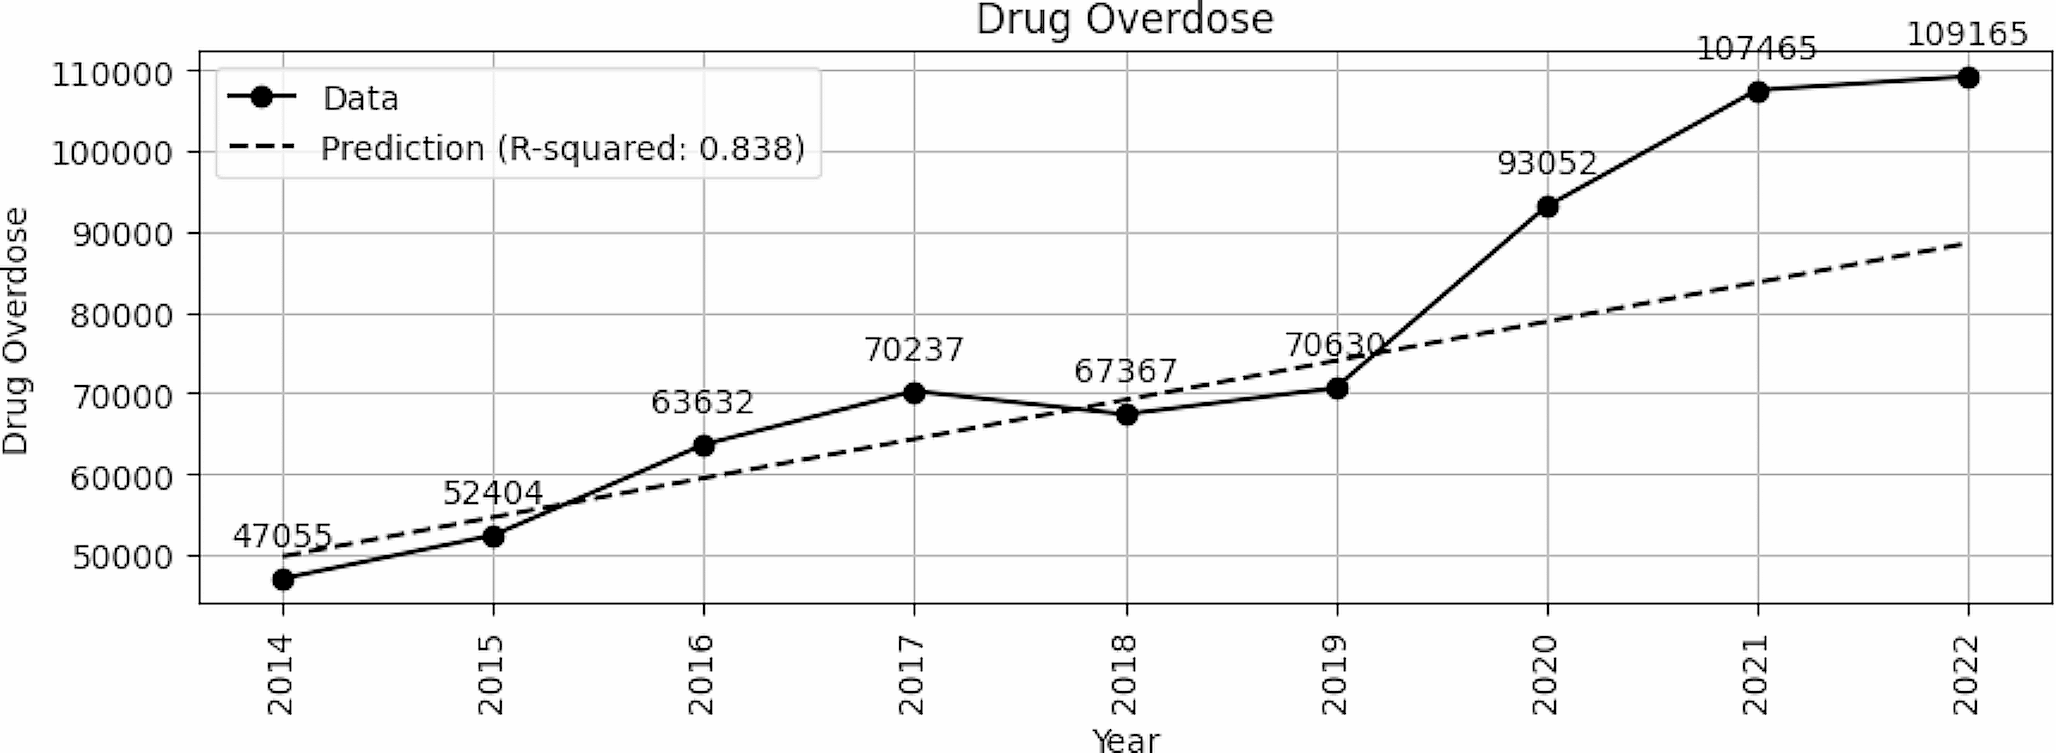 COVID-19’s impact on drug overdose fatalities and urgent mental health care demand in the US